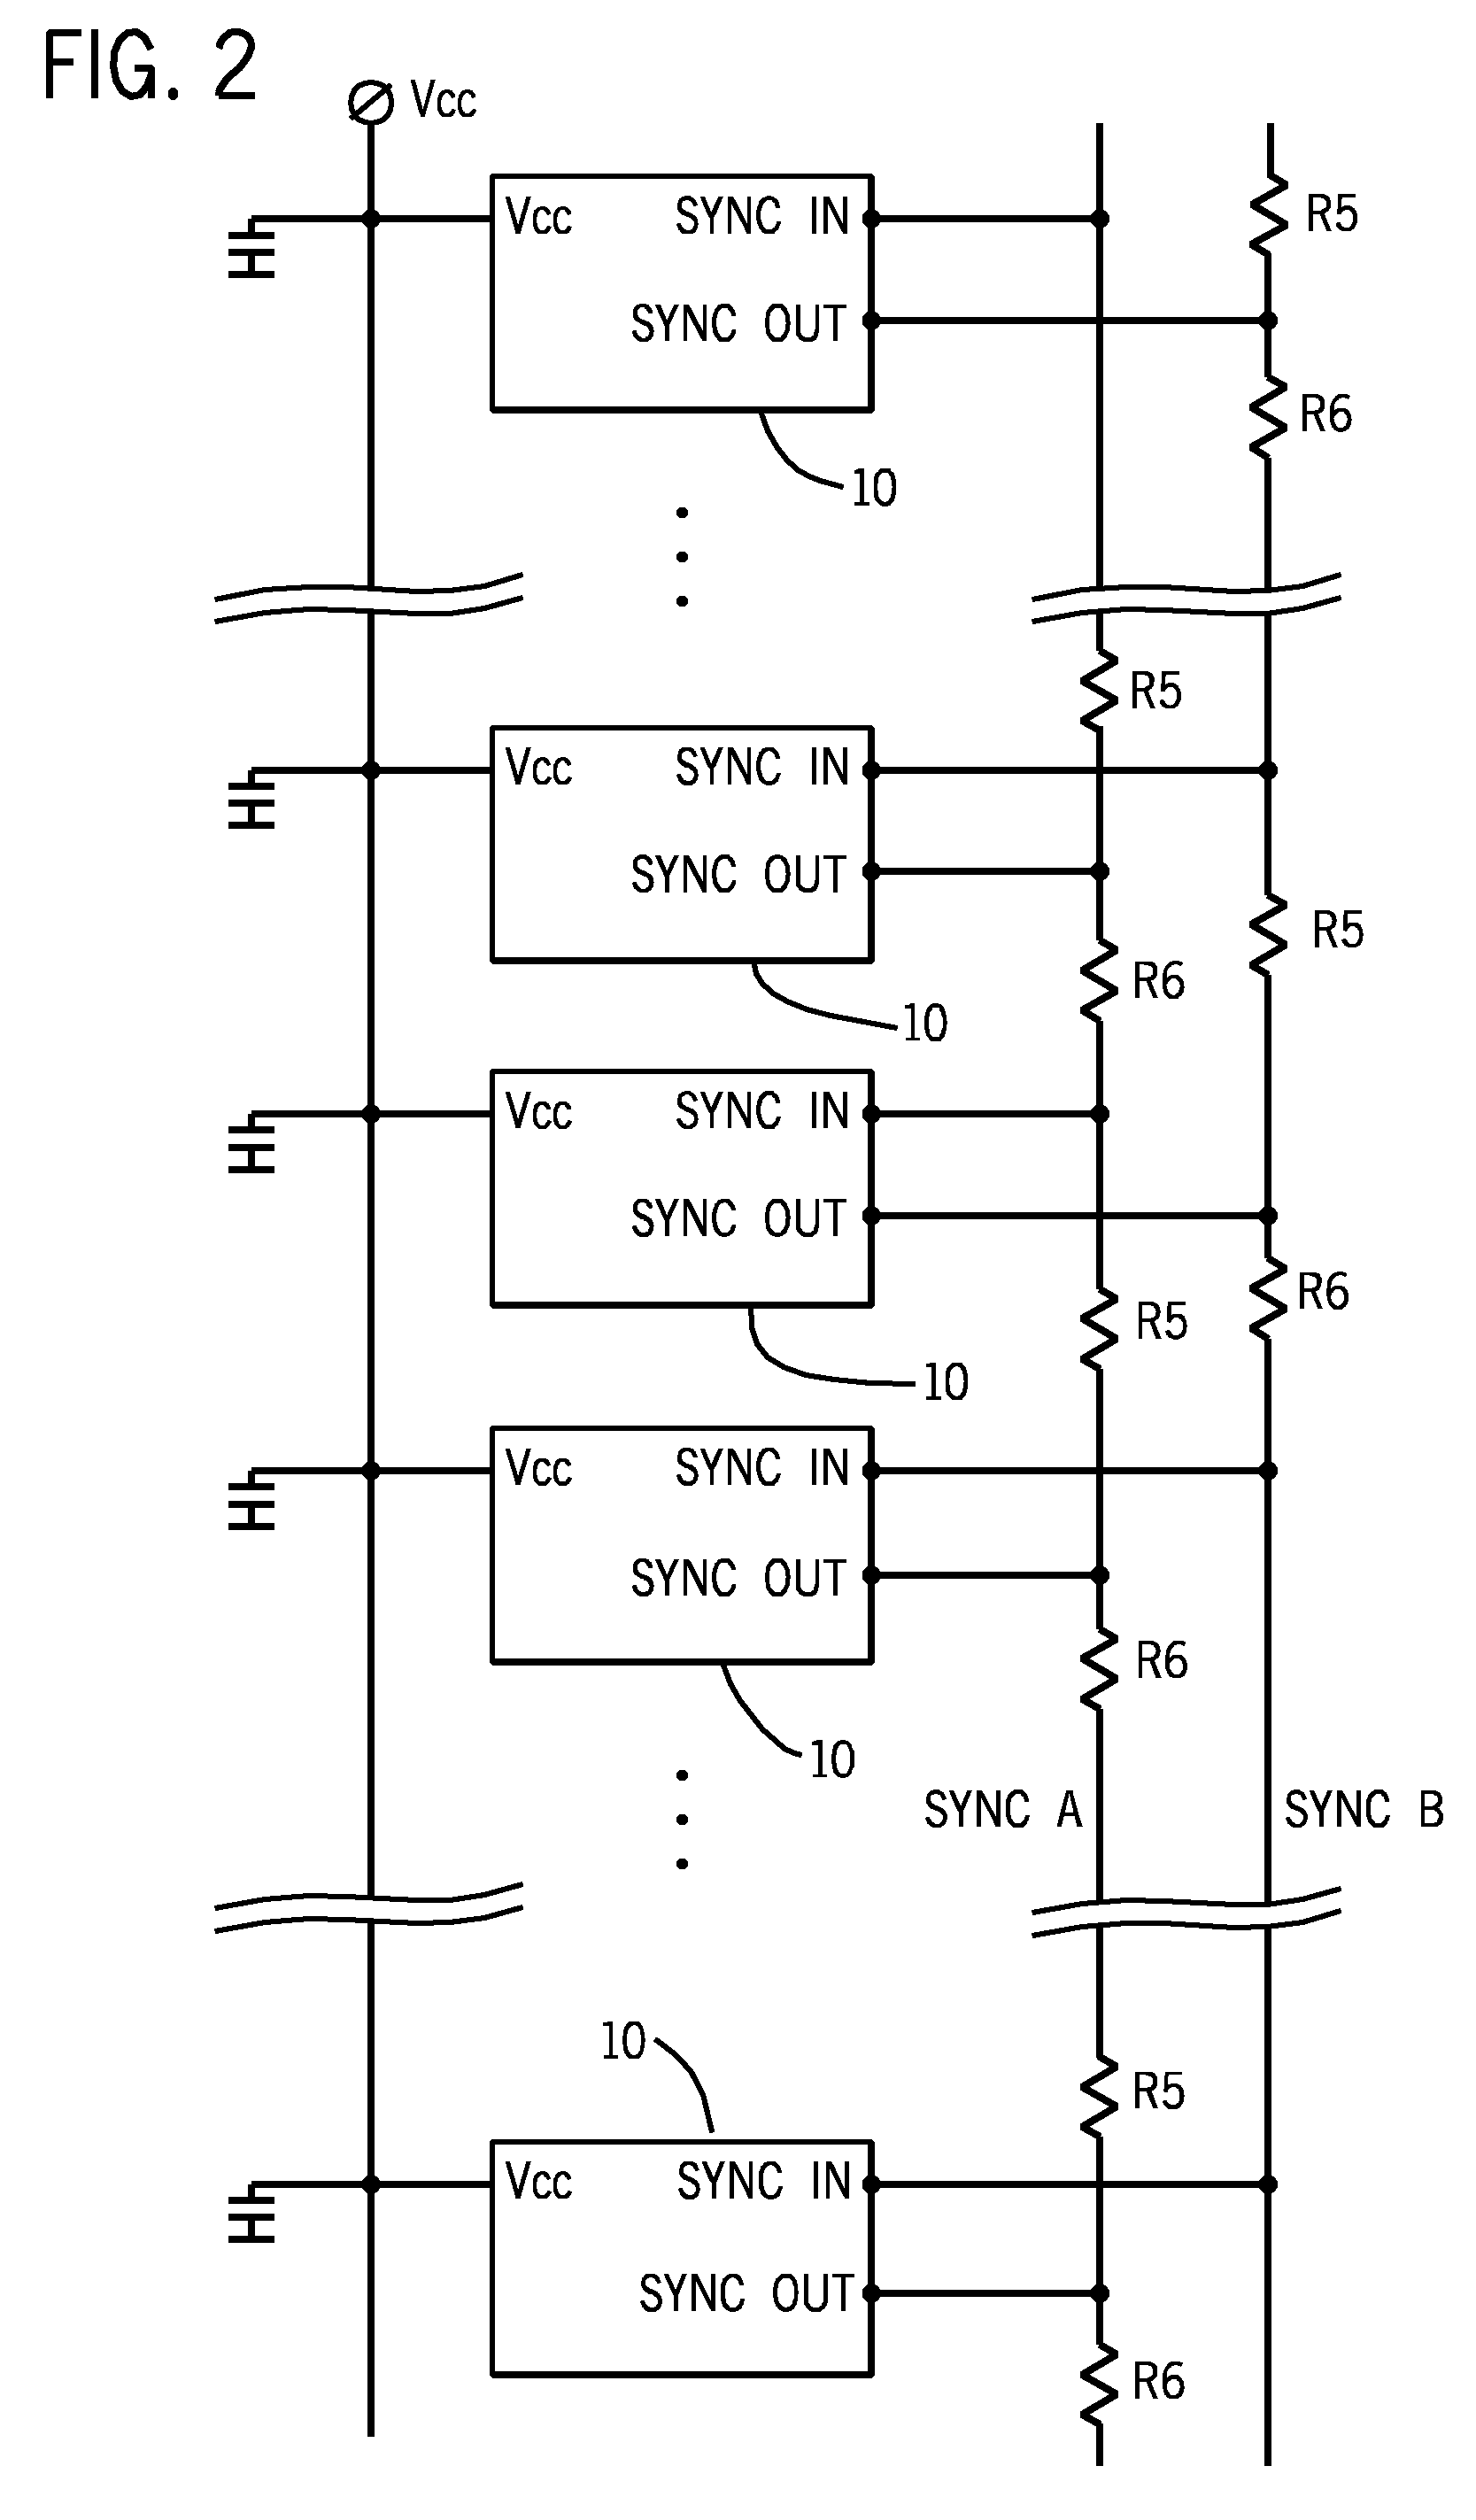 Crystal- based oscillator for use in synchronized system